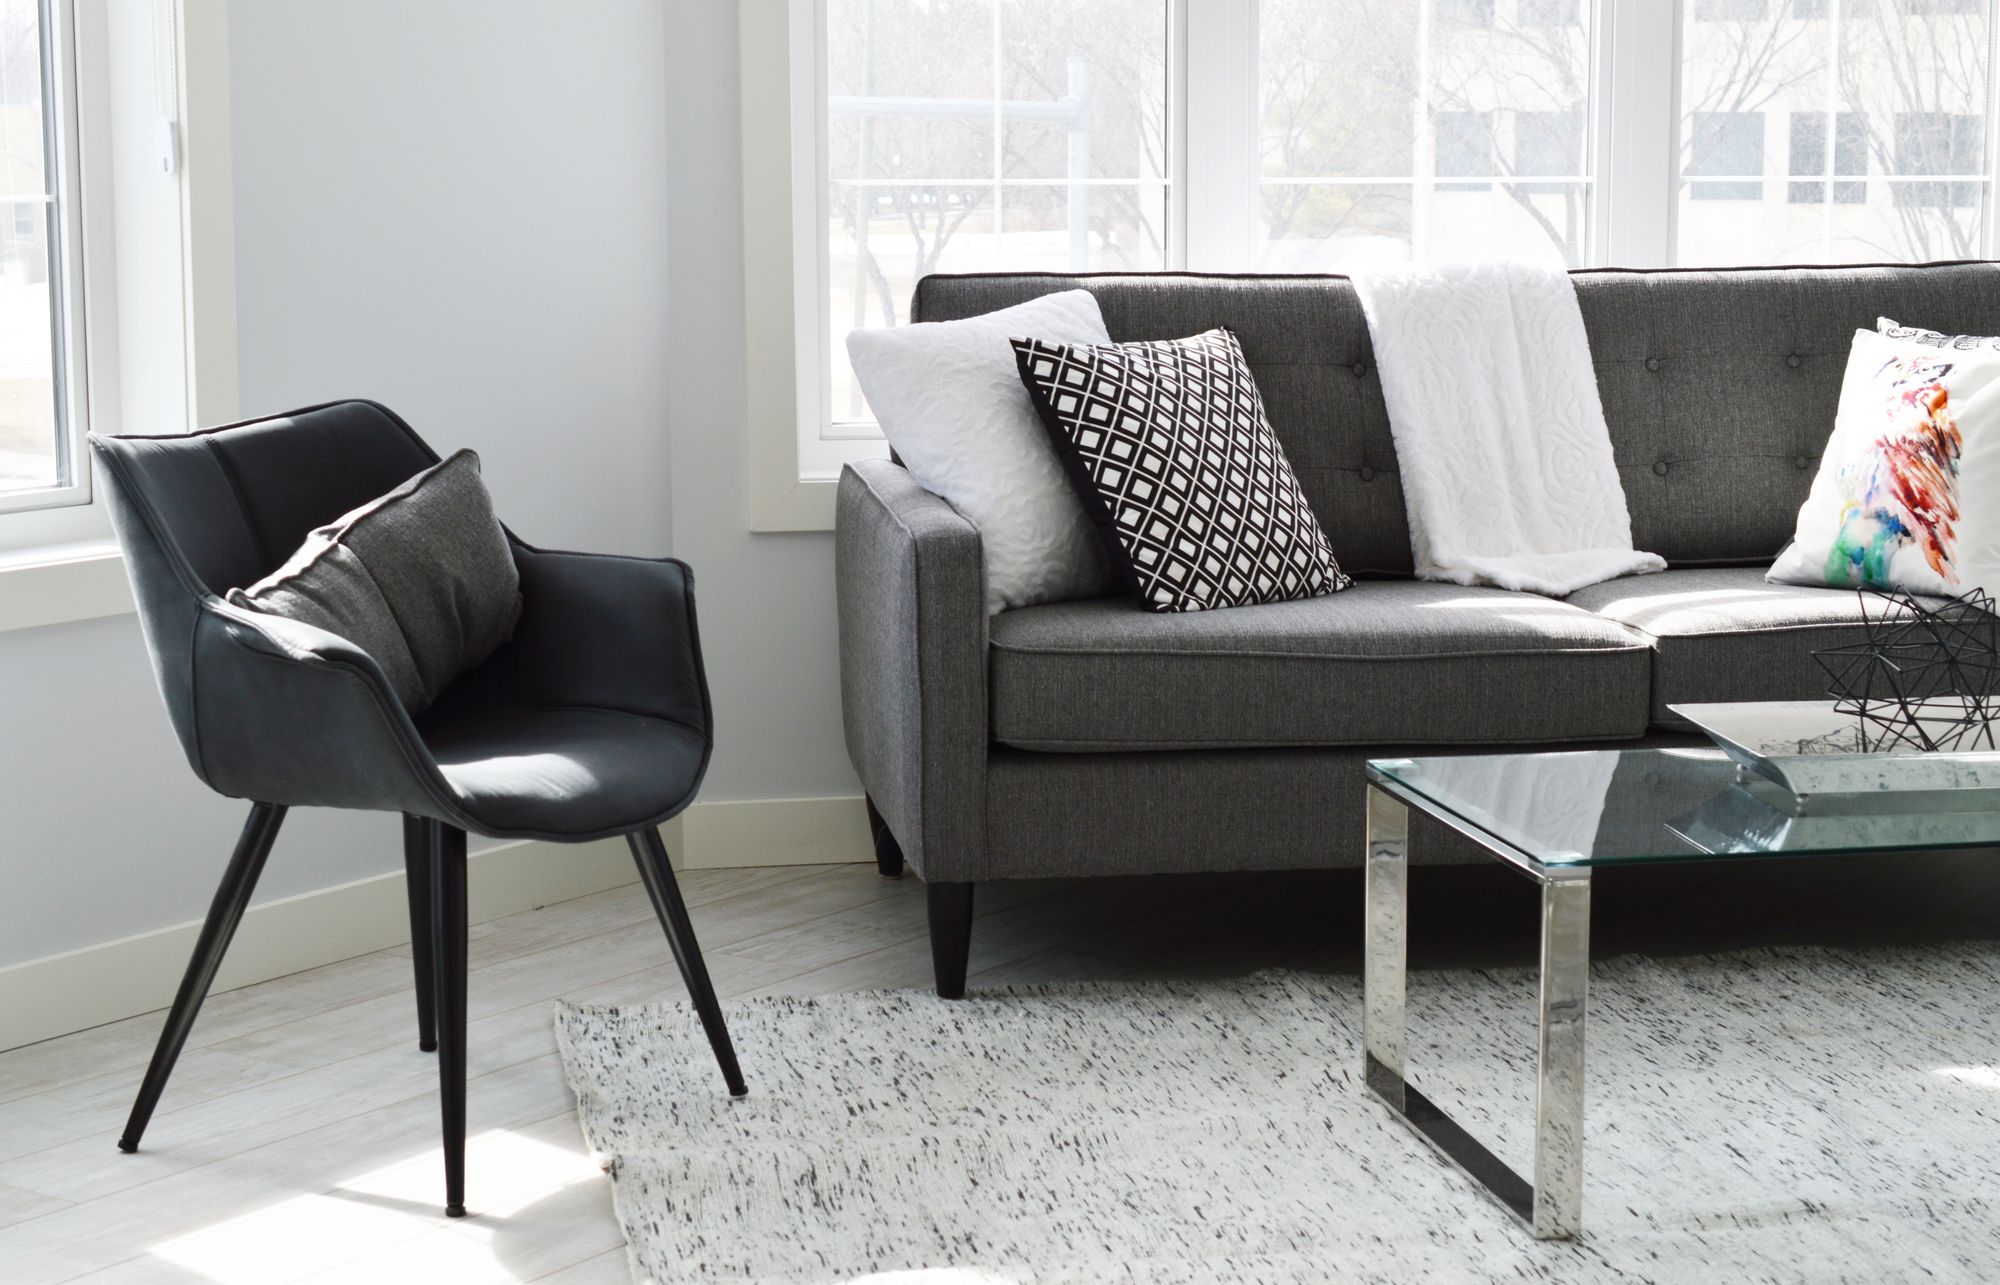 Furniture - Choosing The Right Furniture For Your Home: